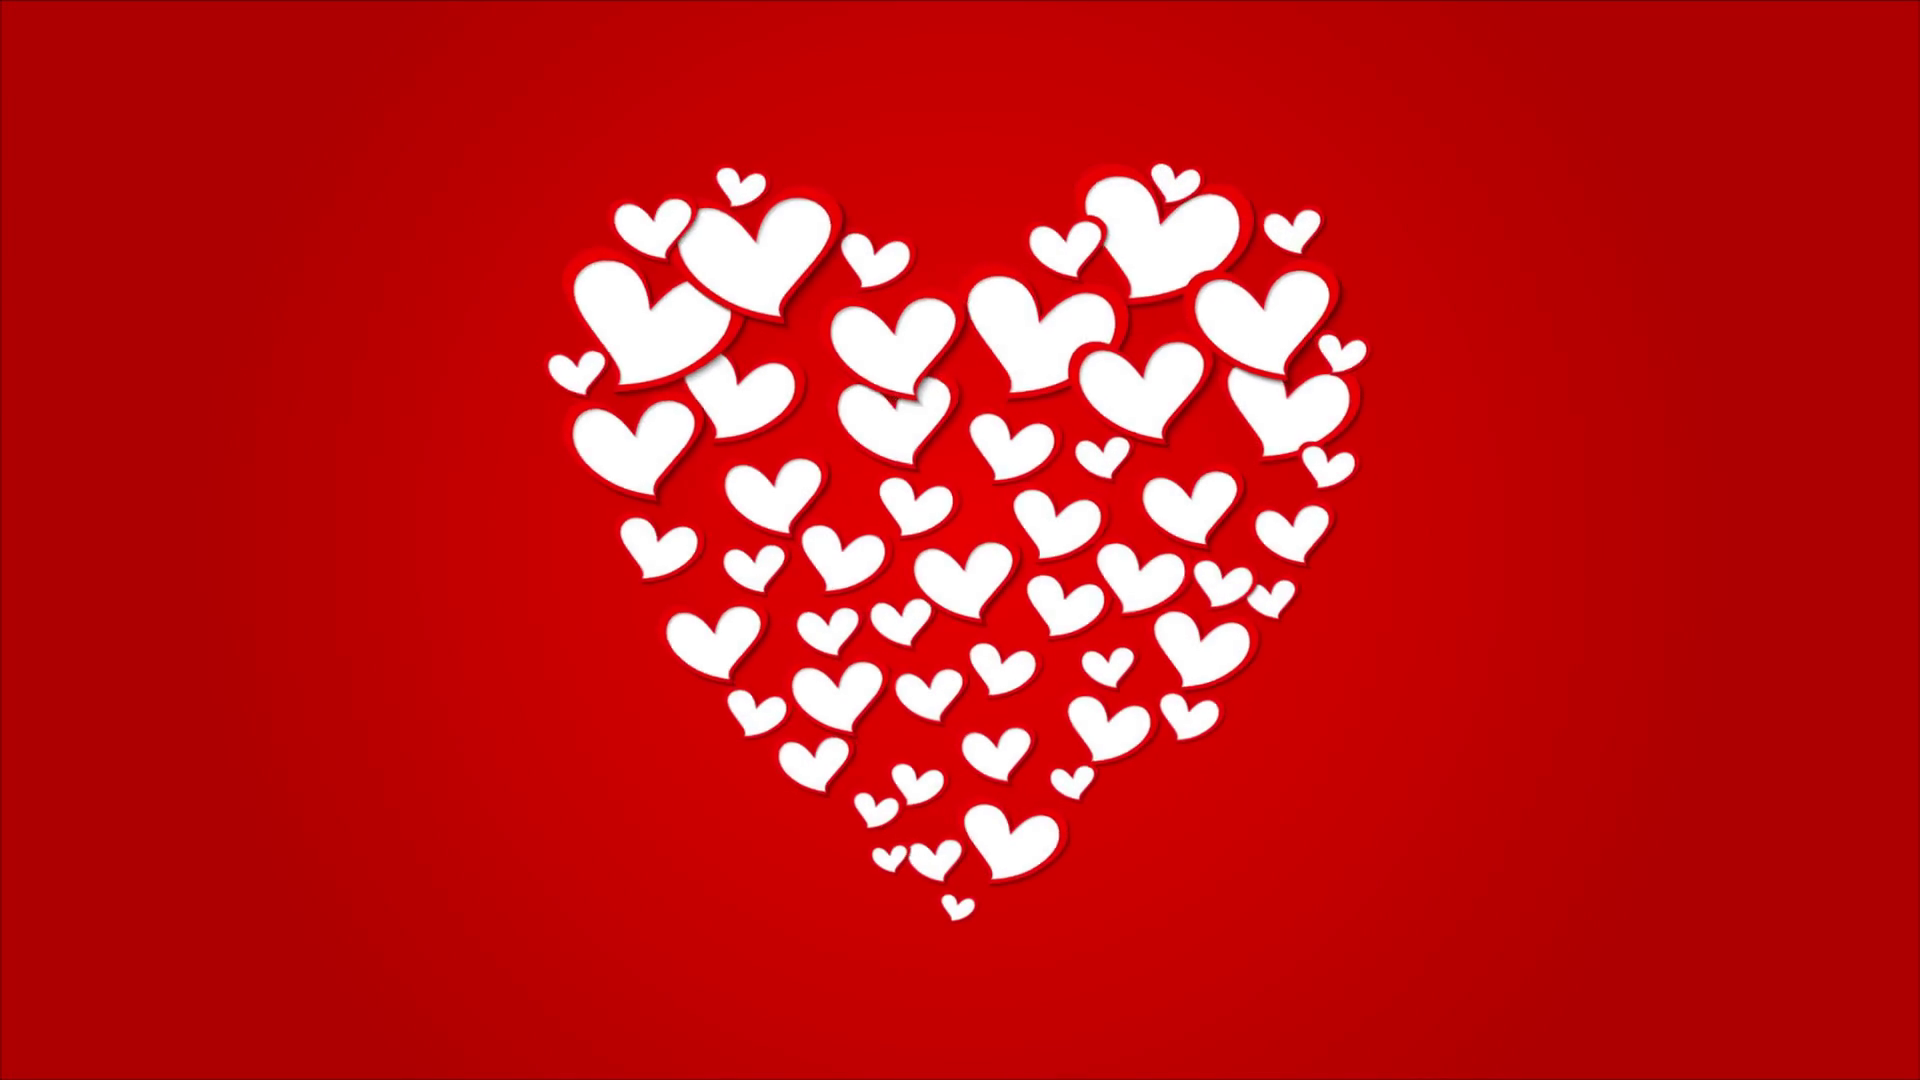 love animation wallpaper,heart,red,valentine's day,love,heart